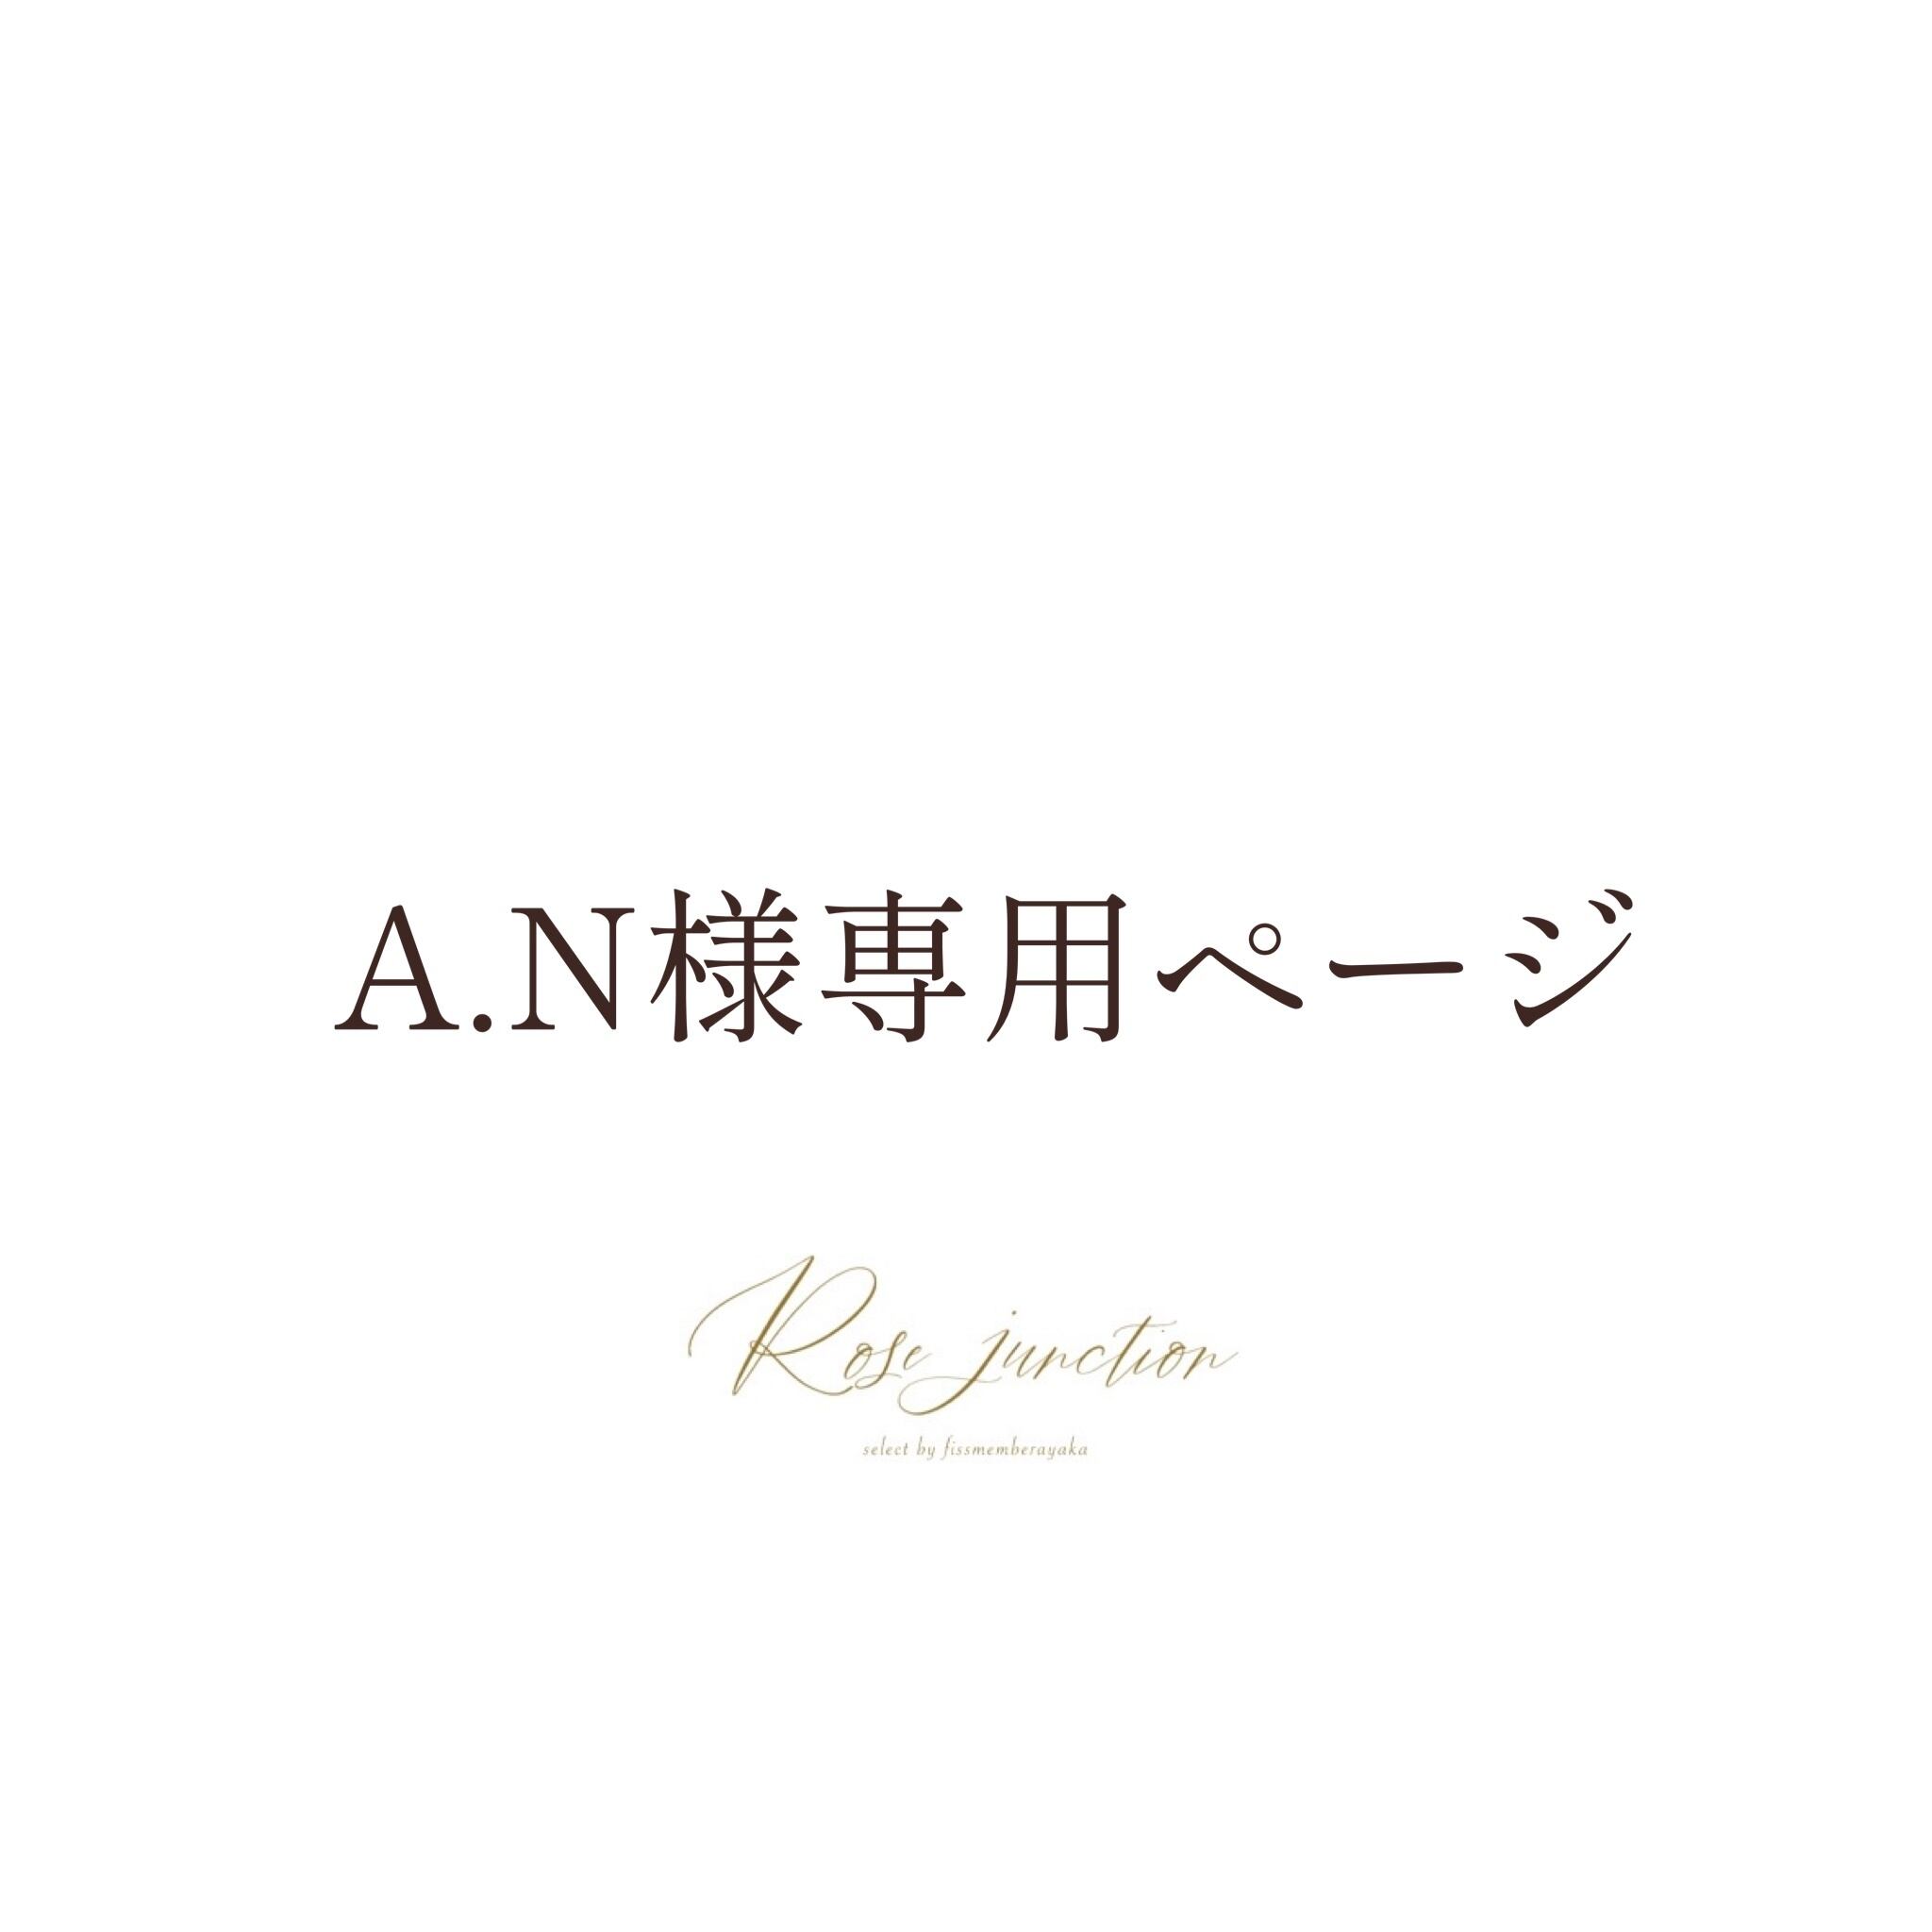 A.N様 専用ページ | Rose junction